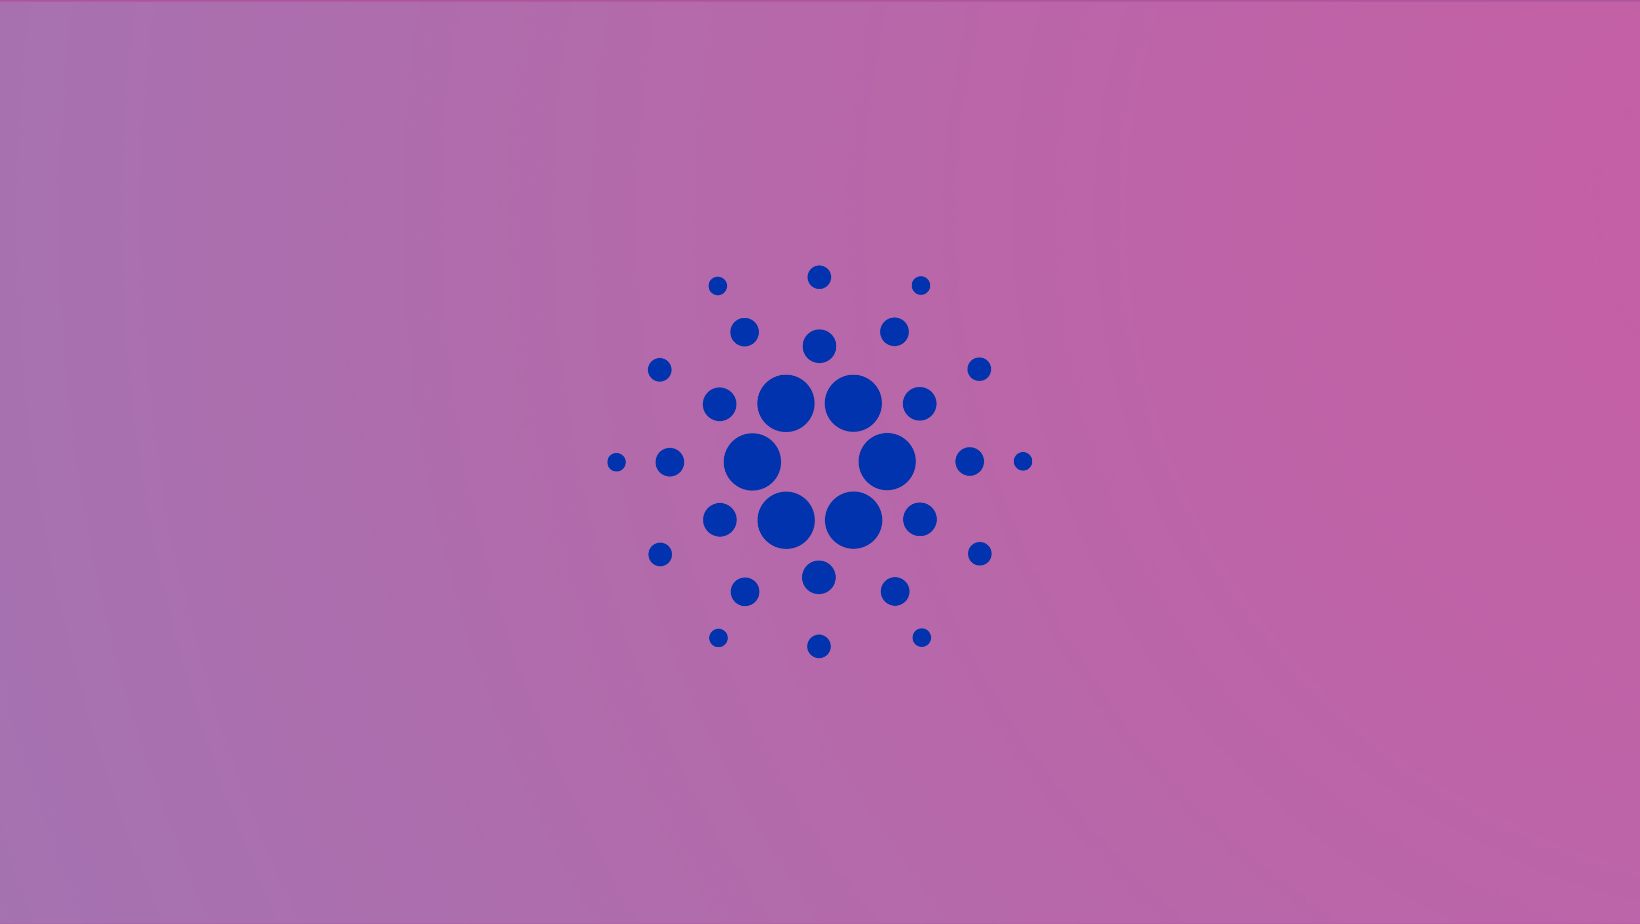 Best Staking Platforms for Cardano (ADA) in 2022